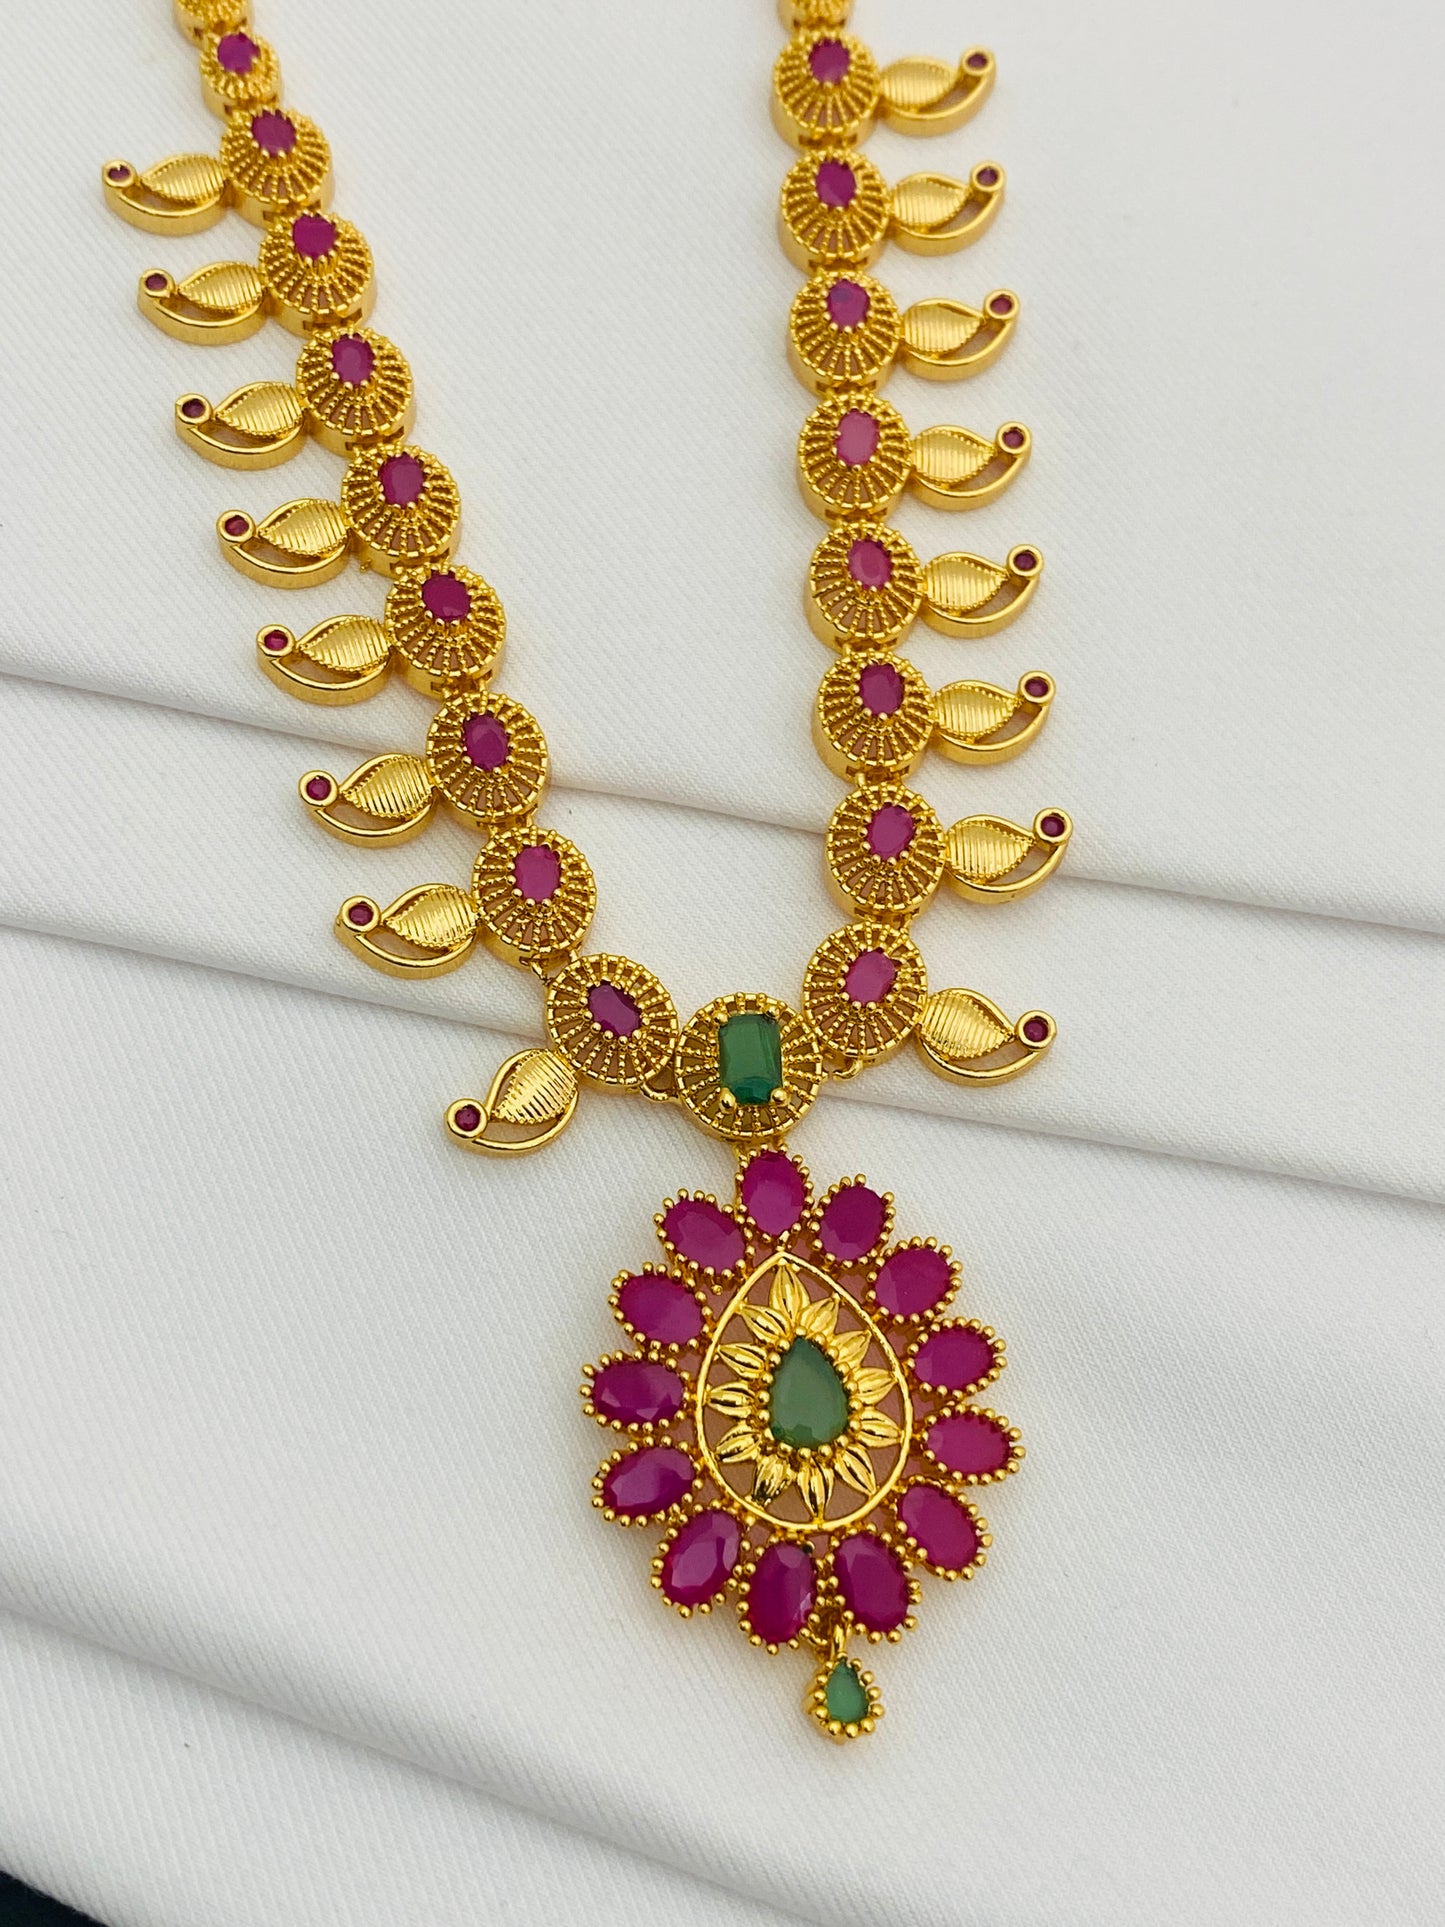 Premium Quality Ruby Stoned Necklace In Scottsdale